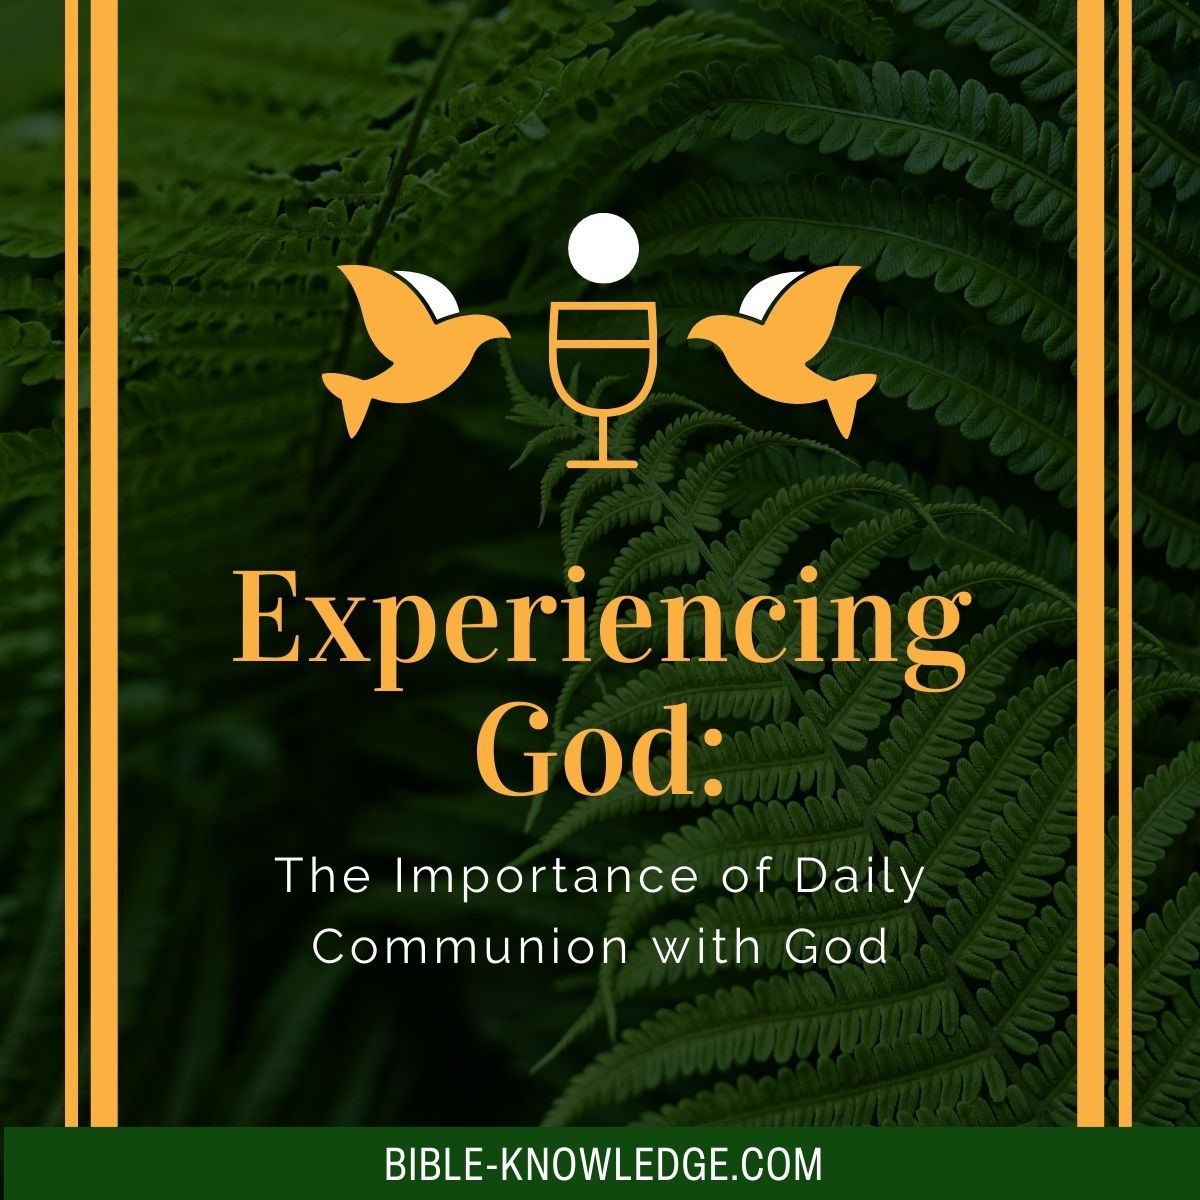 The Importance of Daily Communion with God